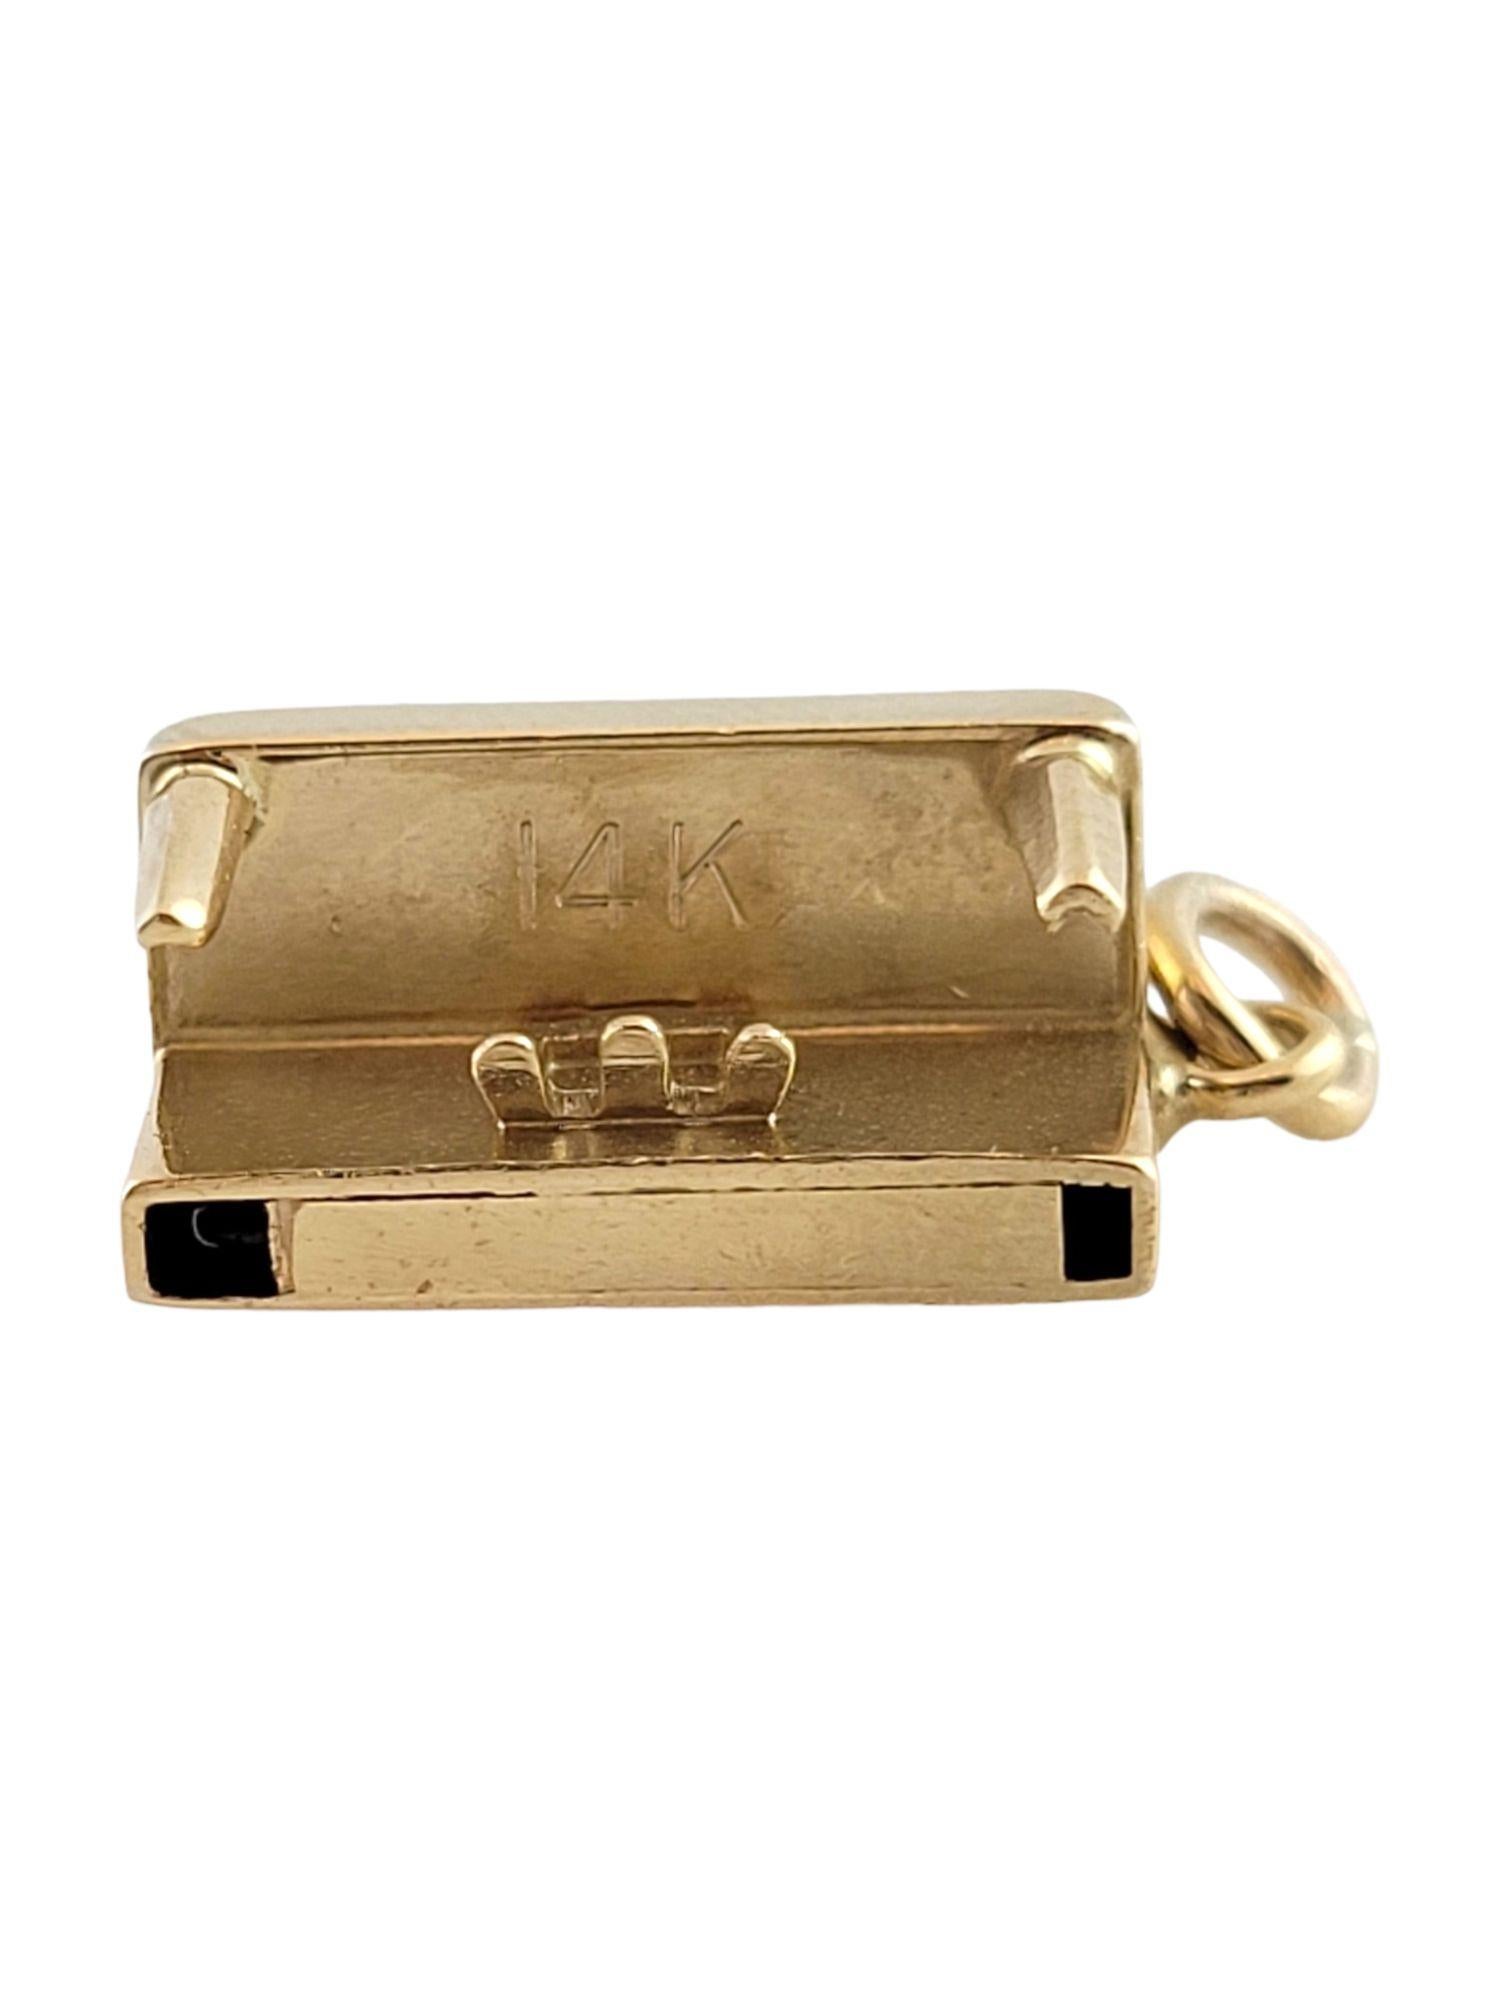  14K Yellow Gold Piano Organ Charm #14857 In Good Condition For Sale In Washington Depot, CT